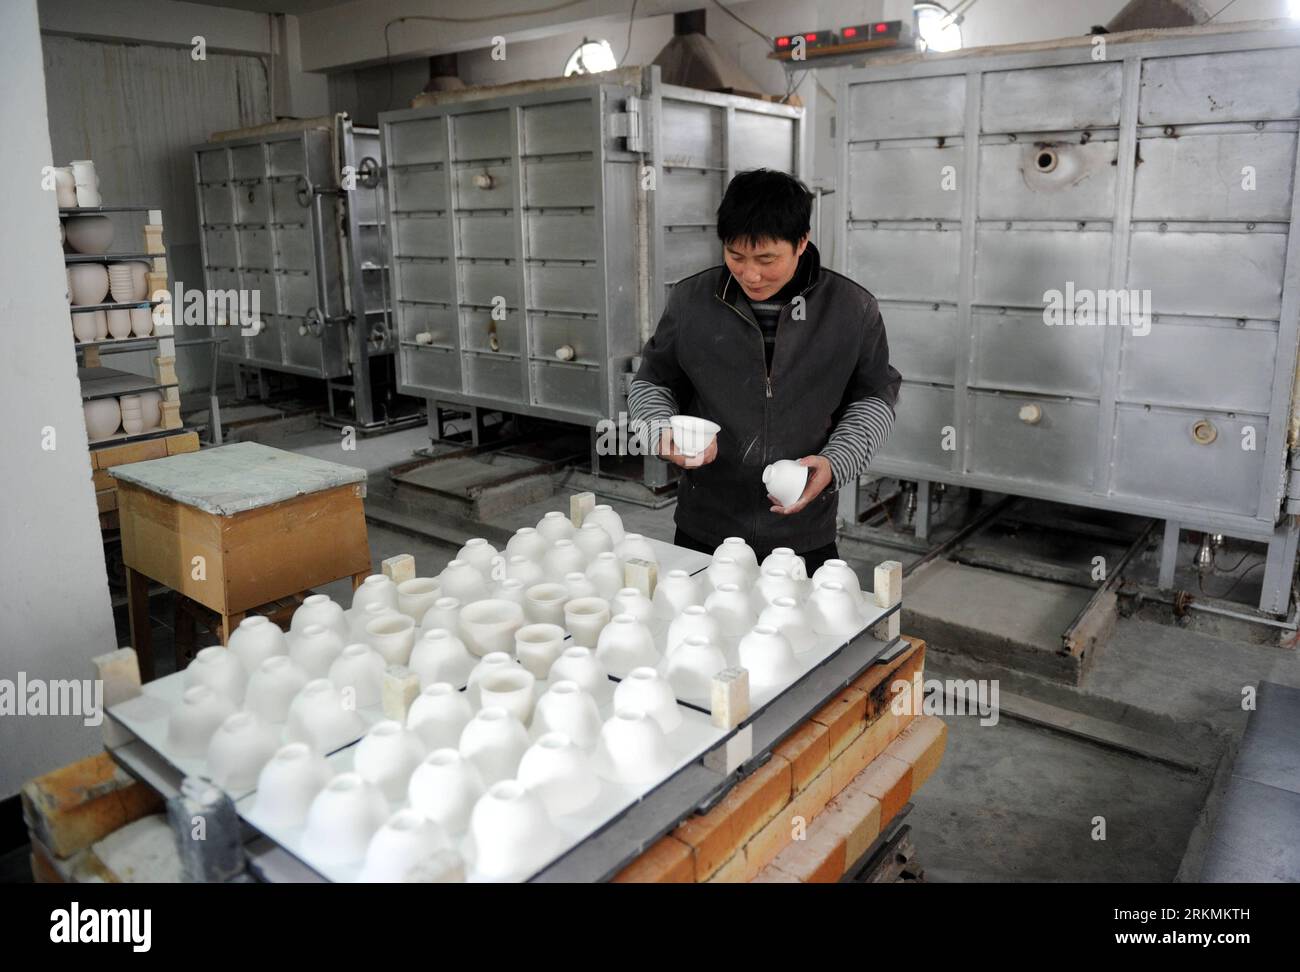 Bildnummer: 56778413  Datum: 21.12.2011  Copyright: imago/Xinhua (111223) -- JINGDEZHEN, Dec. 23, 2011 (Xinhua) -- A technician places adobes at a procelain workshop in Porcelain Capital Jingdezhen City, east China s Jiangxi Province, Dec. 21, 2011. Jingdezhen s percelain has been famous not only in China but in time it became known internationally for being as thin as paper, as white as jade, as bright as a mirror, and as sound as a bell. (Xinhua/Zhou Ke) (xzj) (BRIDING WE) CHINA-JIANGXI-JINGDEZHEN-PORCELAIN (CN) PUBLICATIONxNOTxINxCHN Wirtschaft Porzellan Arbeitswelten Handwerk Gesellschaft Stock Photo